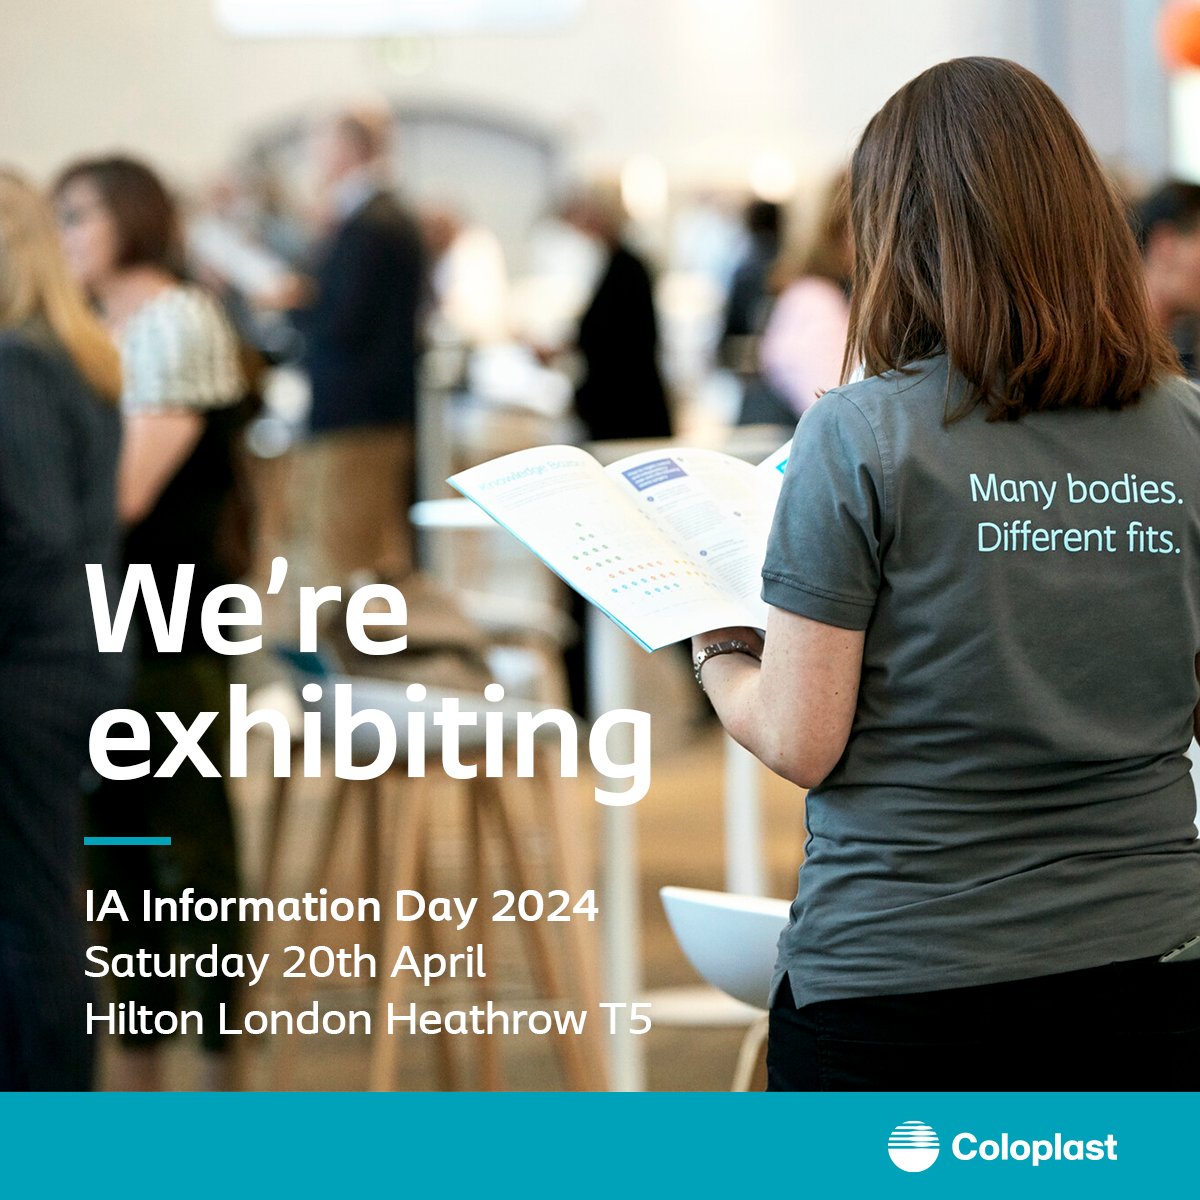 We're pleased to announce we will be attending the IA Information Day at Hilton Heathrow on Saturday 20th April. Come along to our stand and meet the team where we'll be on hand to provide support and advice for your ostomy needs. Learn more: coloplast.co.uk/IA